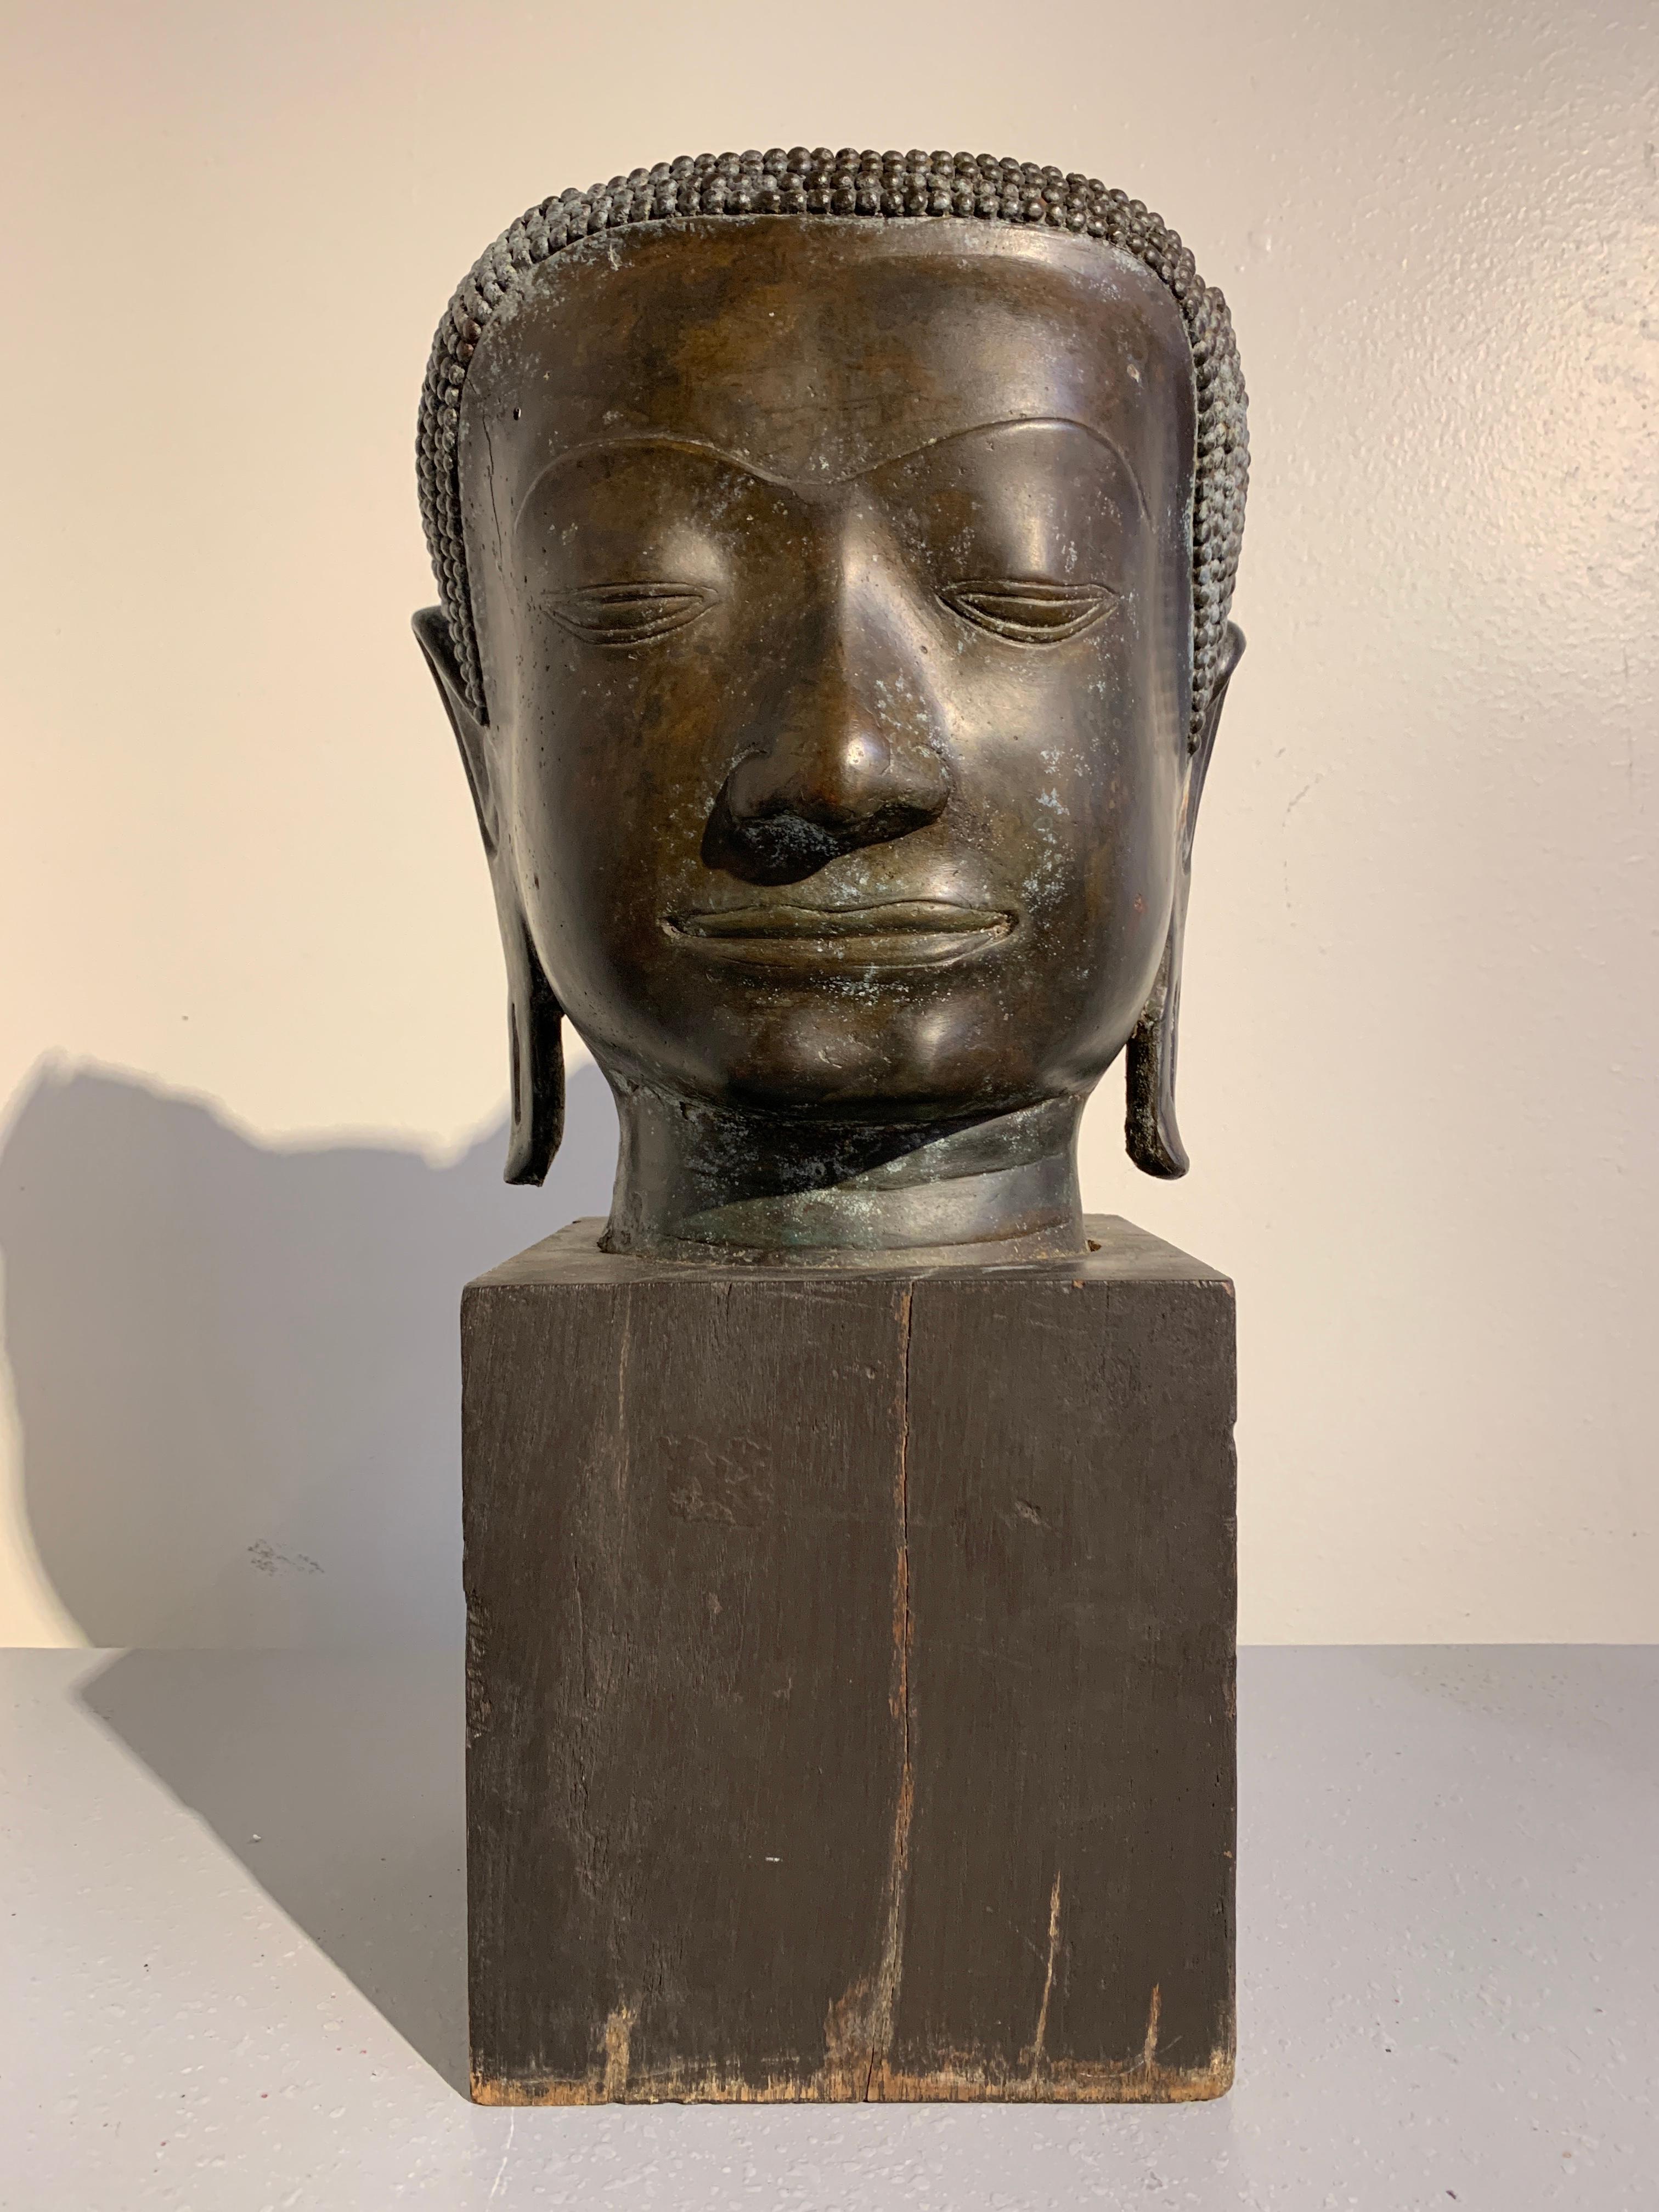 A sublime Thai Ayutthaya Period U-Thong A style life-sized bronze head of the Buddha, circa 14th-15th century.
The beautiful and serene face of the Buddha, framed by a narrow band under neatly arranged coiled hair and long, pendulous earlobes,